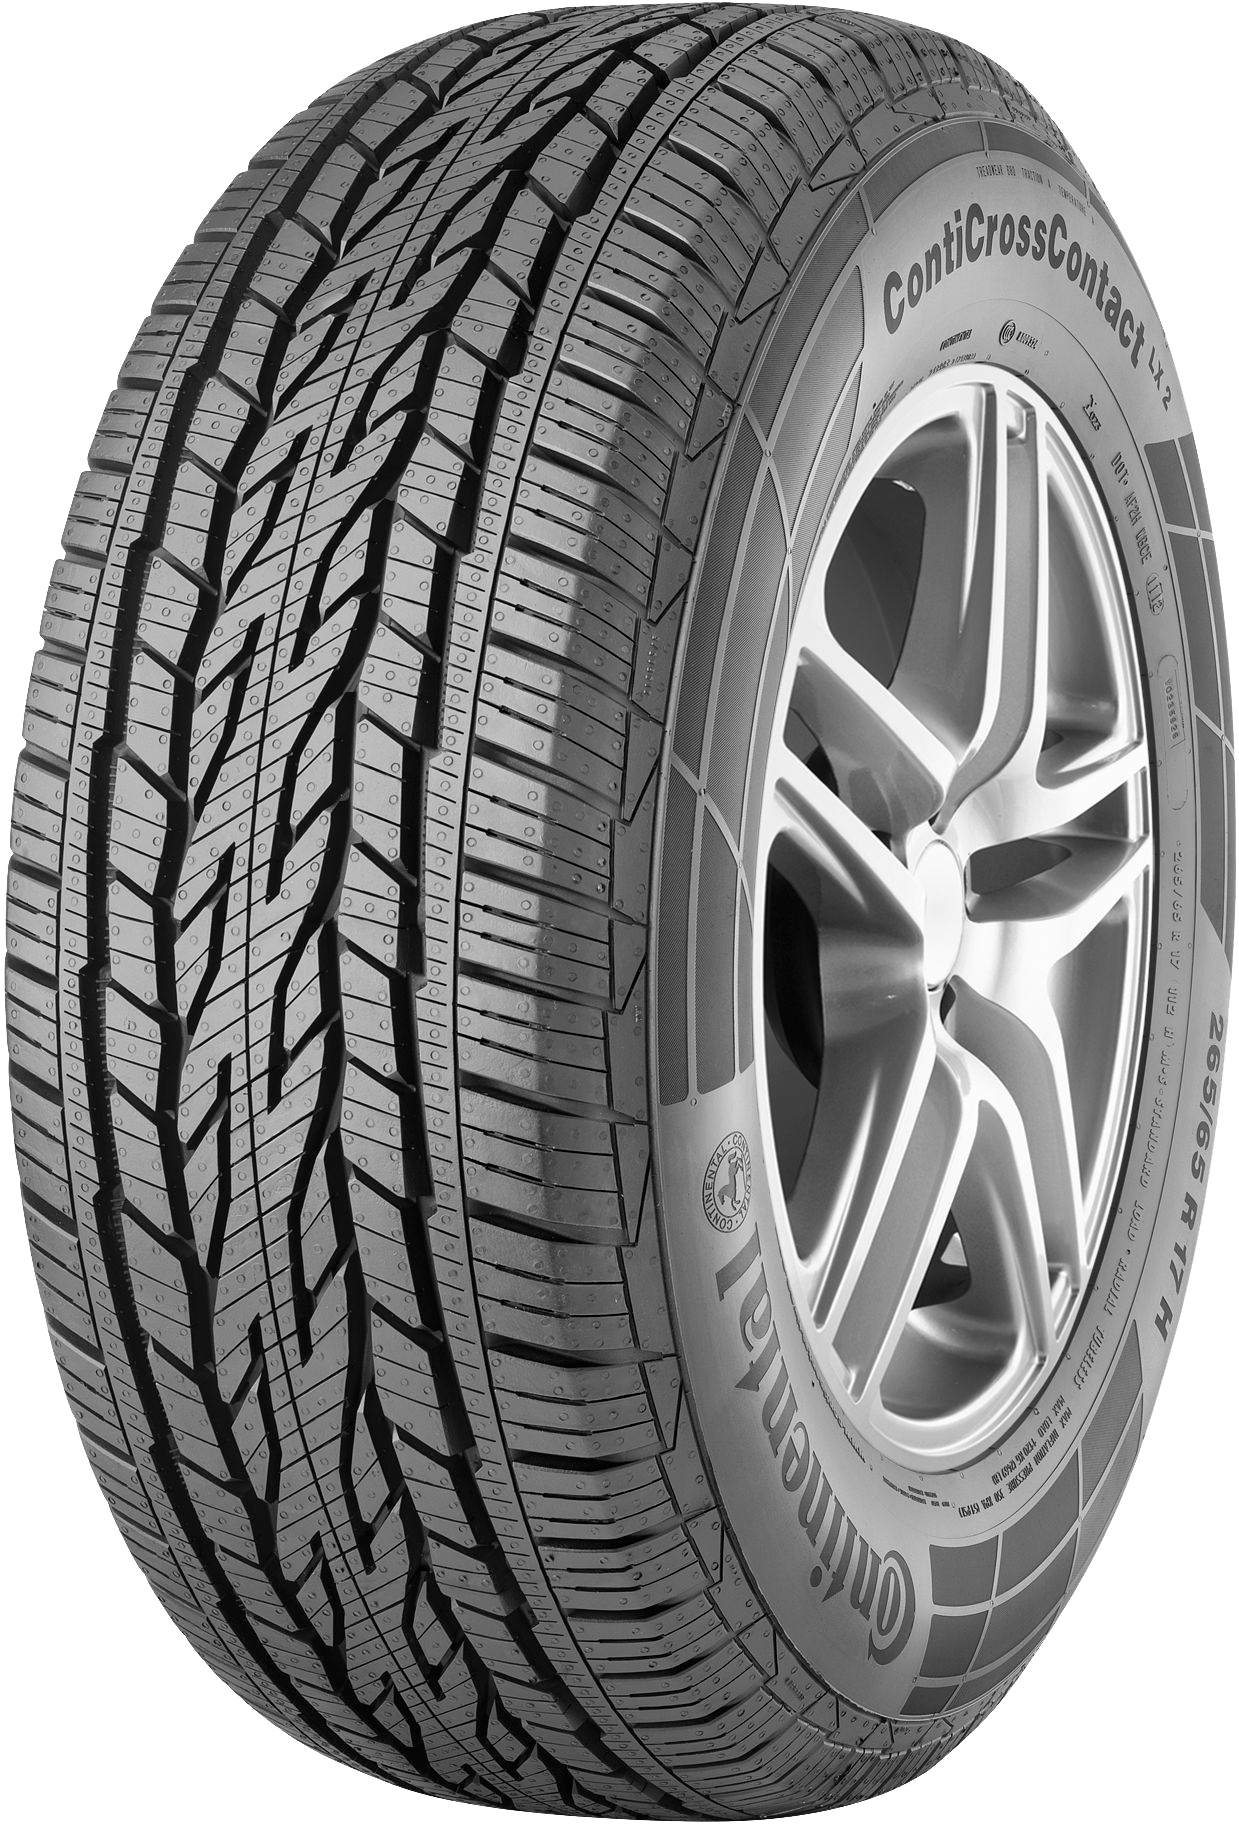 CONTINENTAL ContiCrossContact LX2 235/70 R16 106H